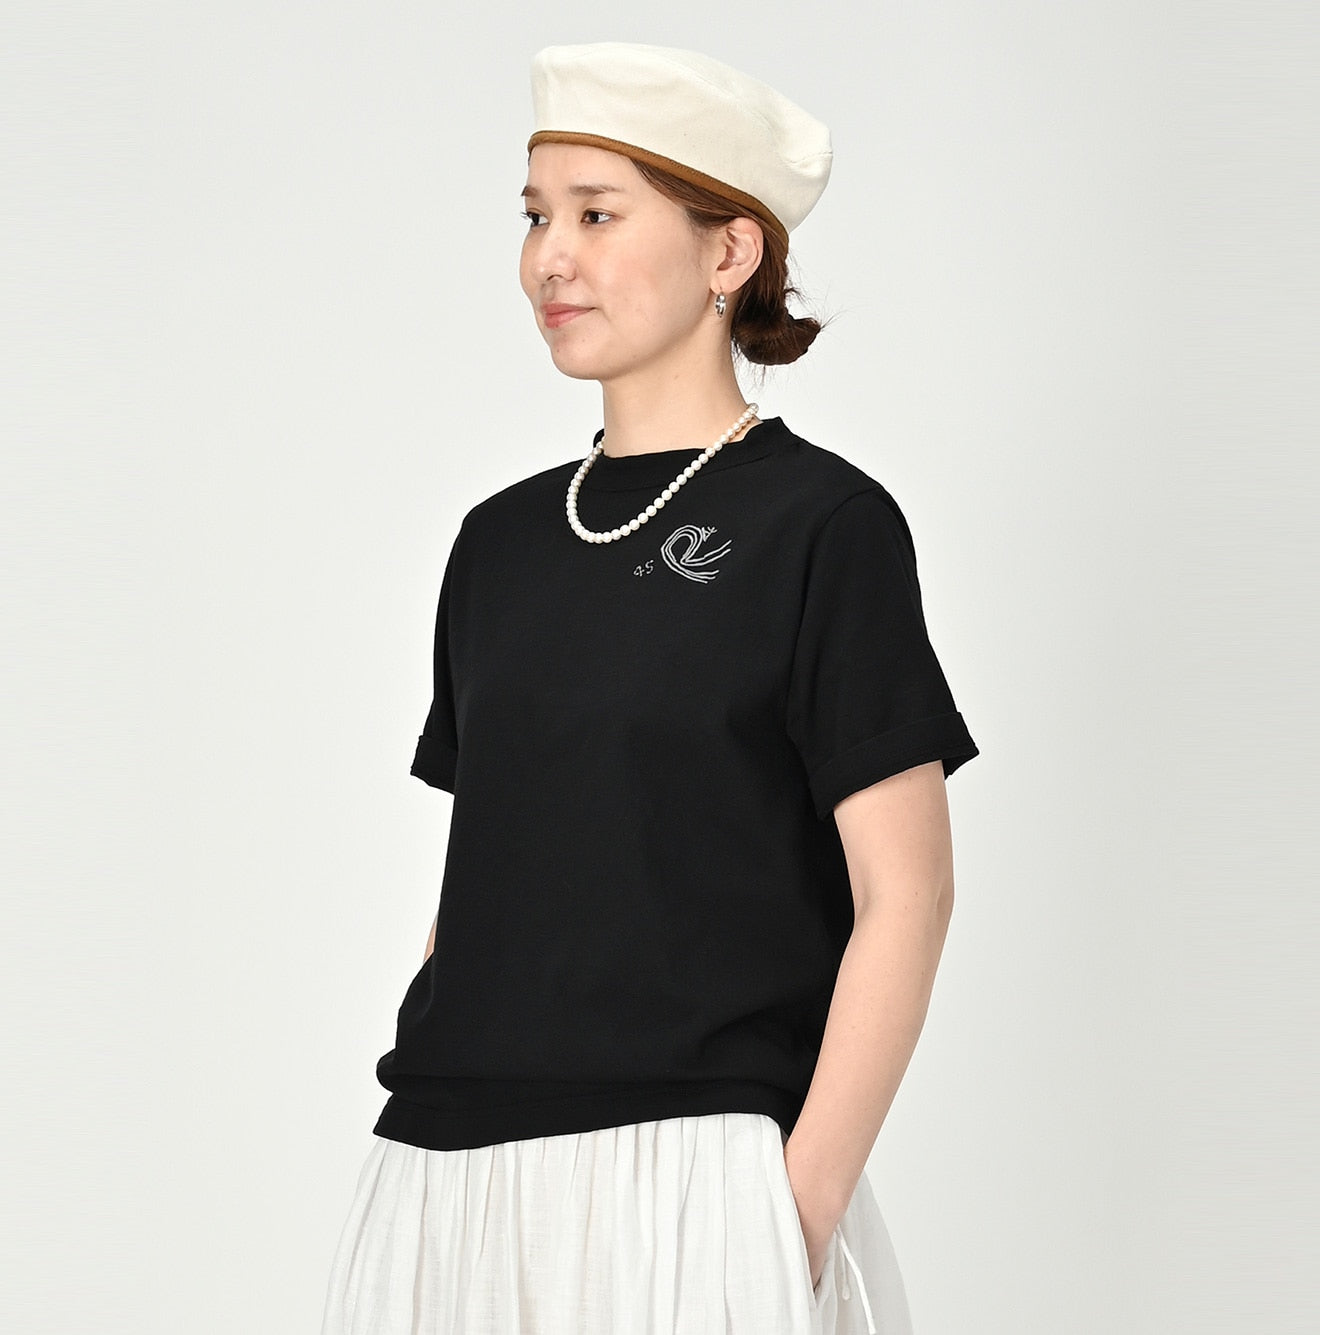 Airon Embroidery R-wave 908 T-shirt